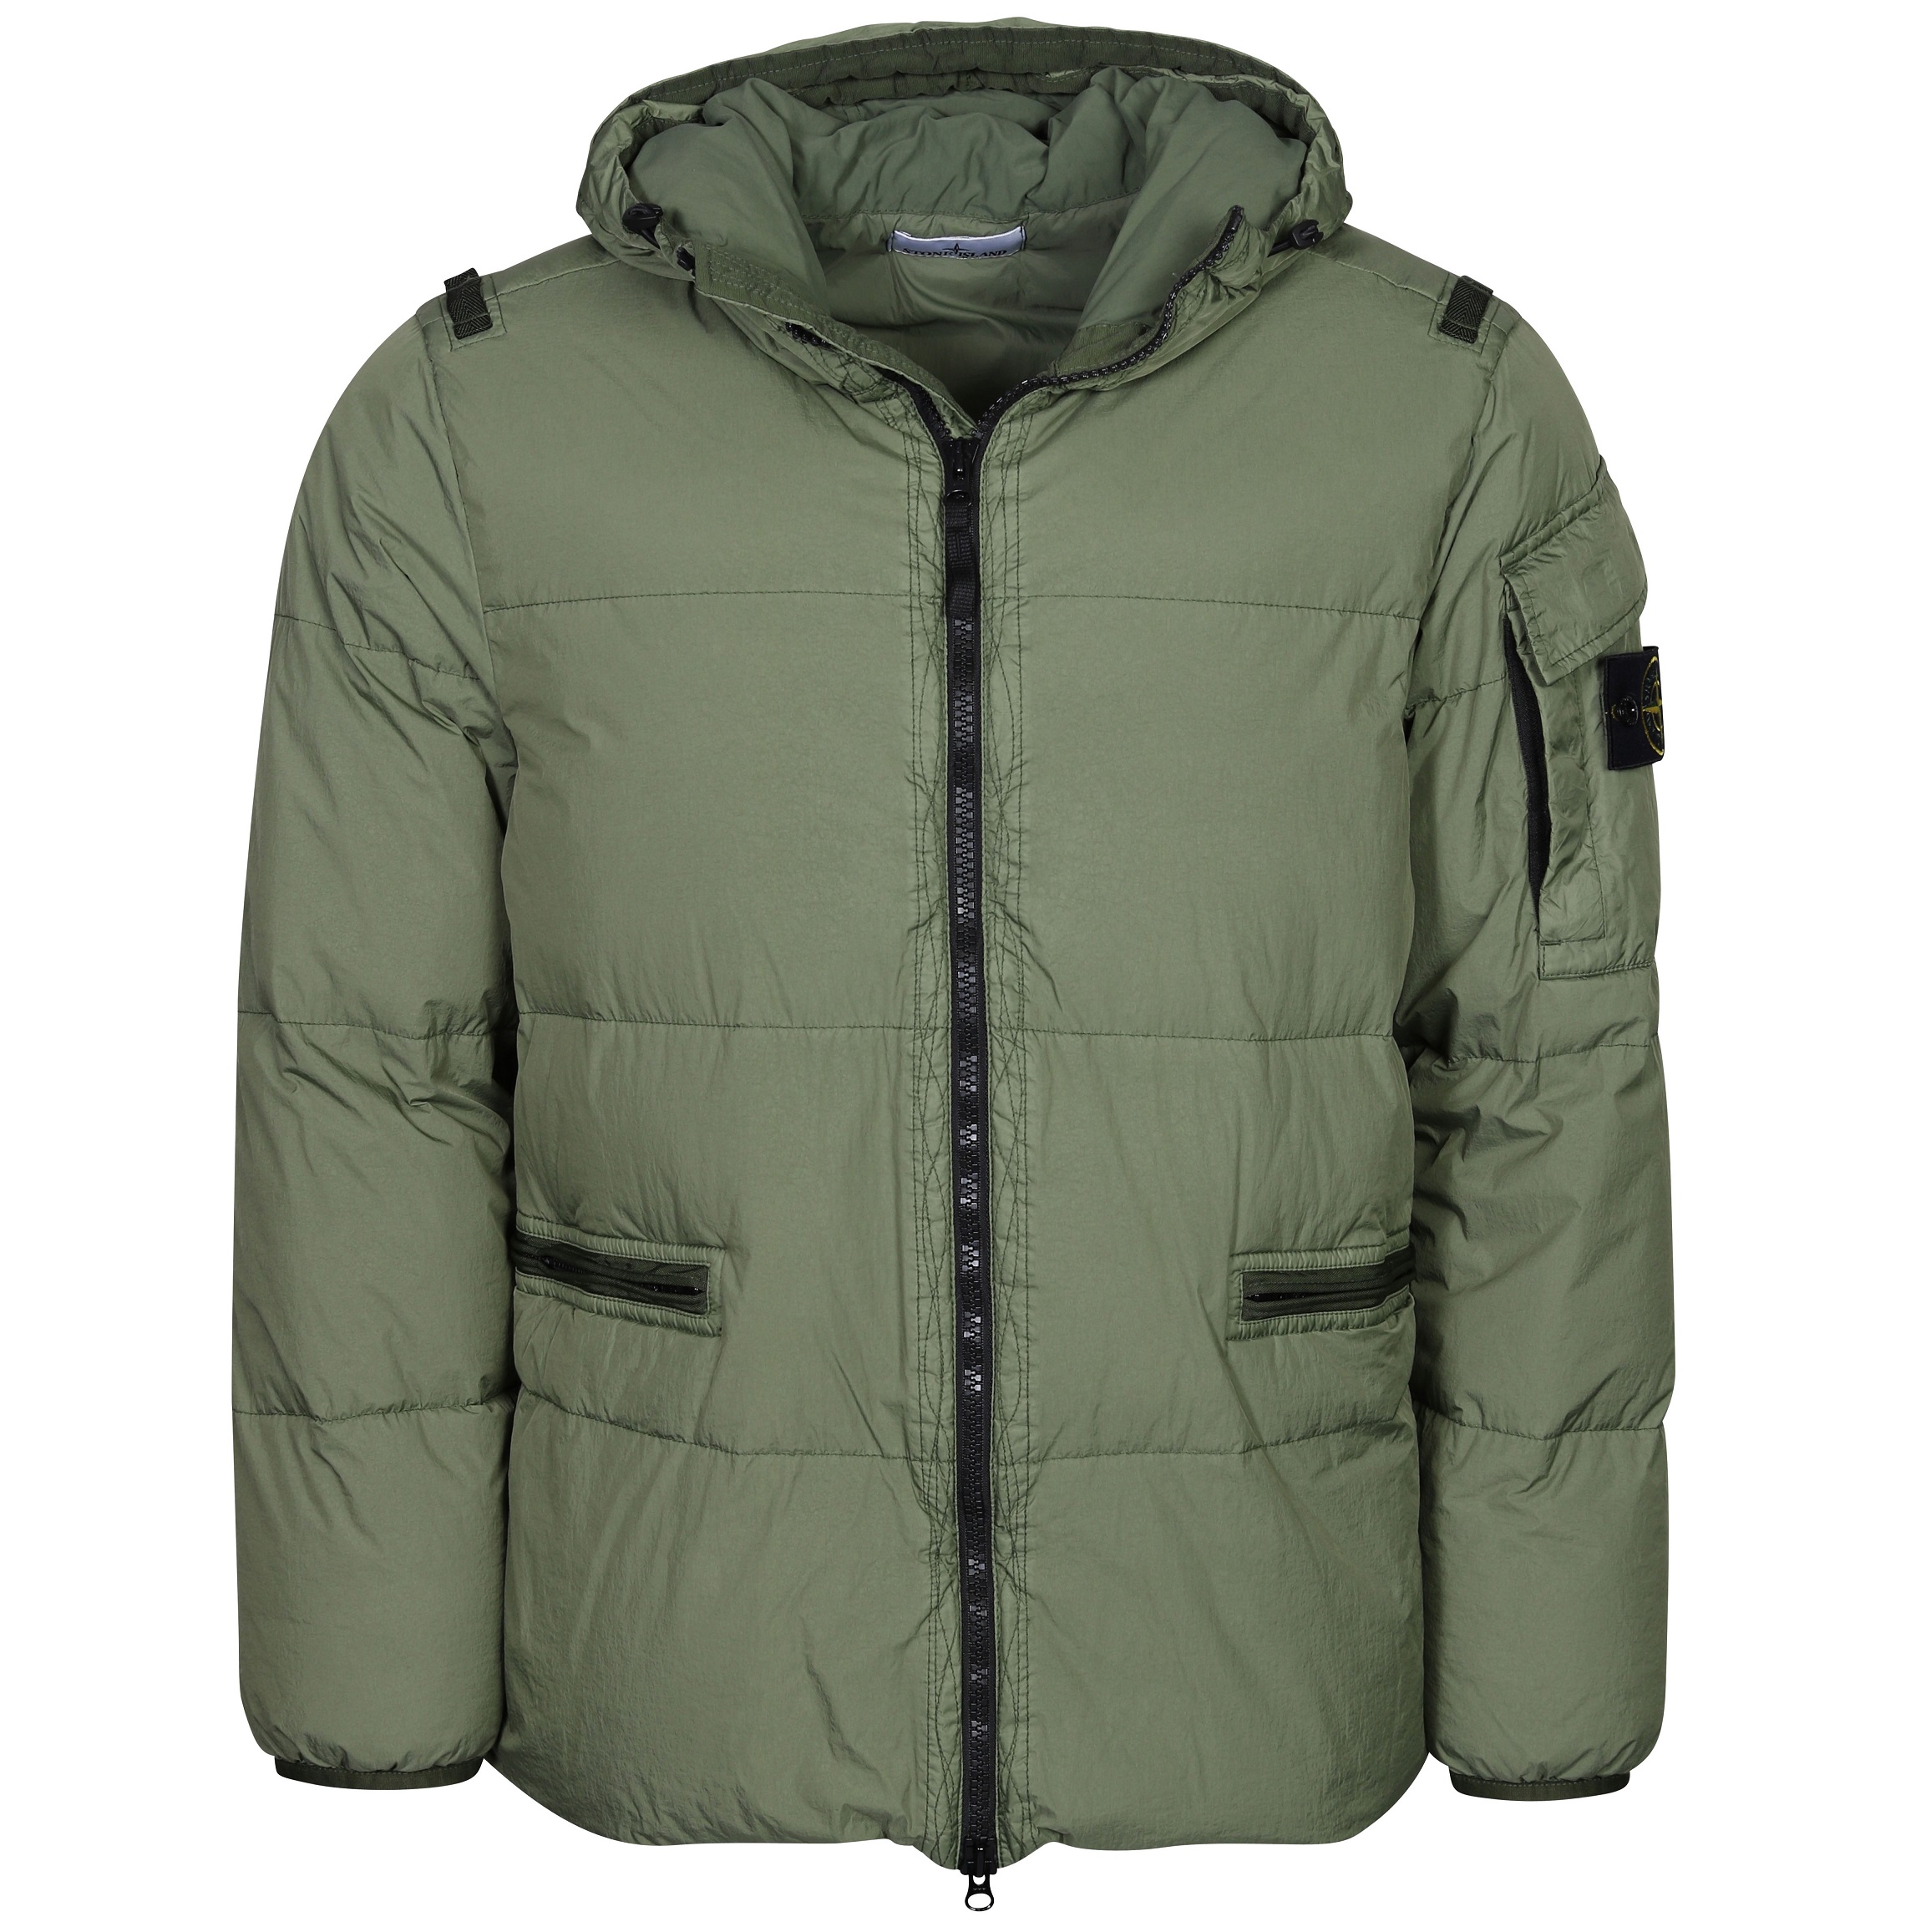 Stone Island Garment Dyed Crincle Reps Ny Down Jacket in Olive